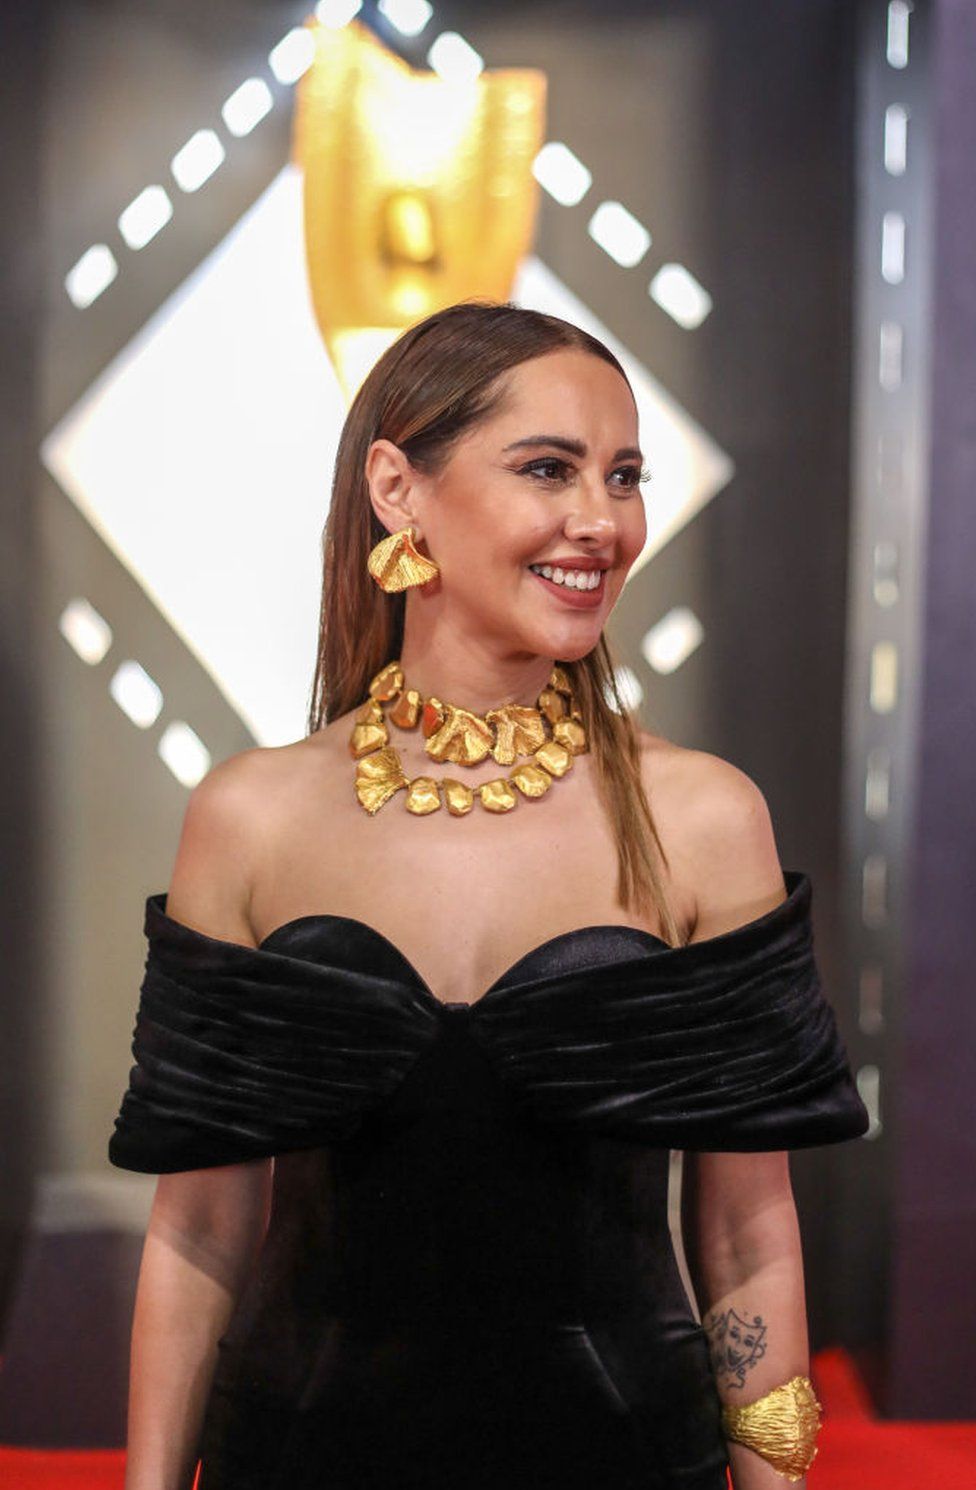 Yasmeen Raess dressed in a black dress and gold jewellery smiling on the red carpet.